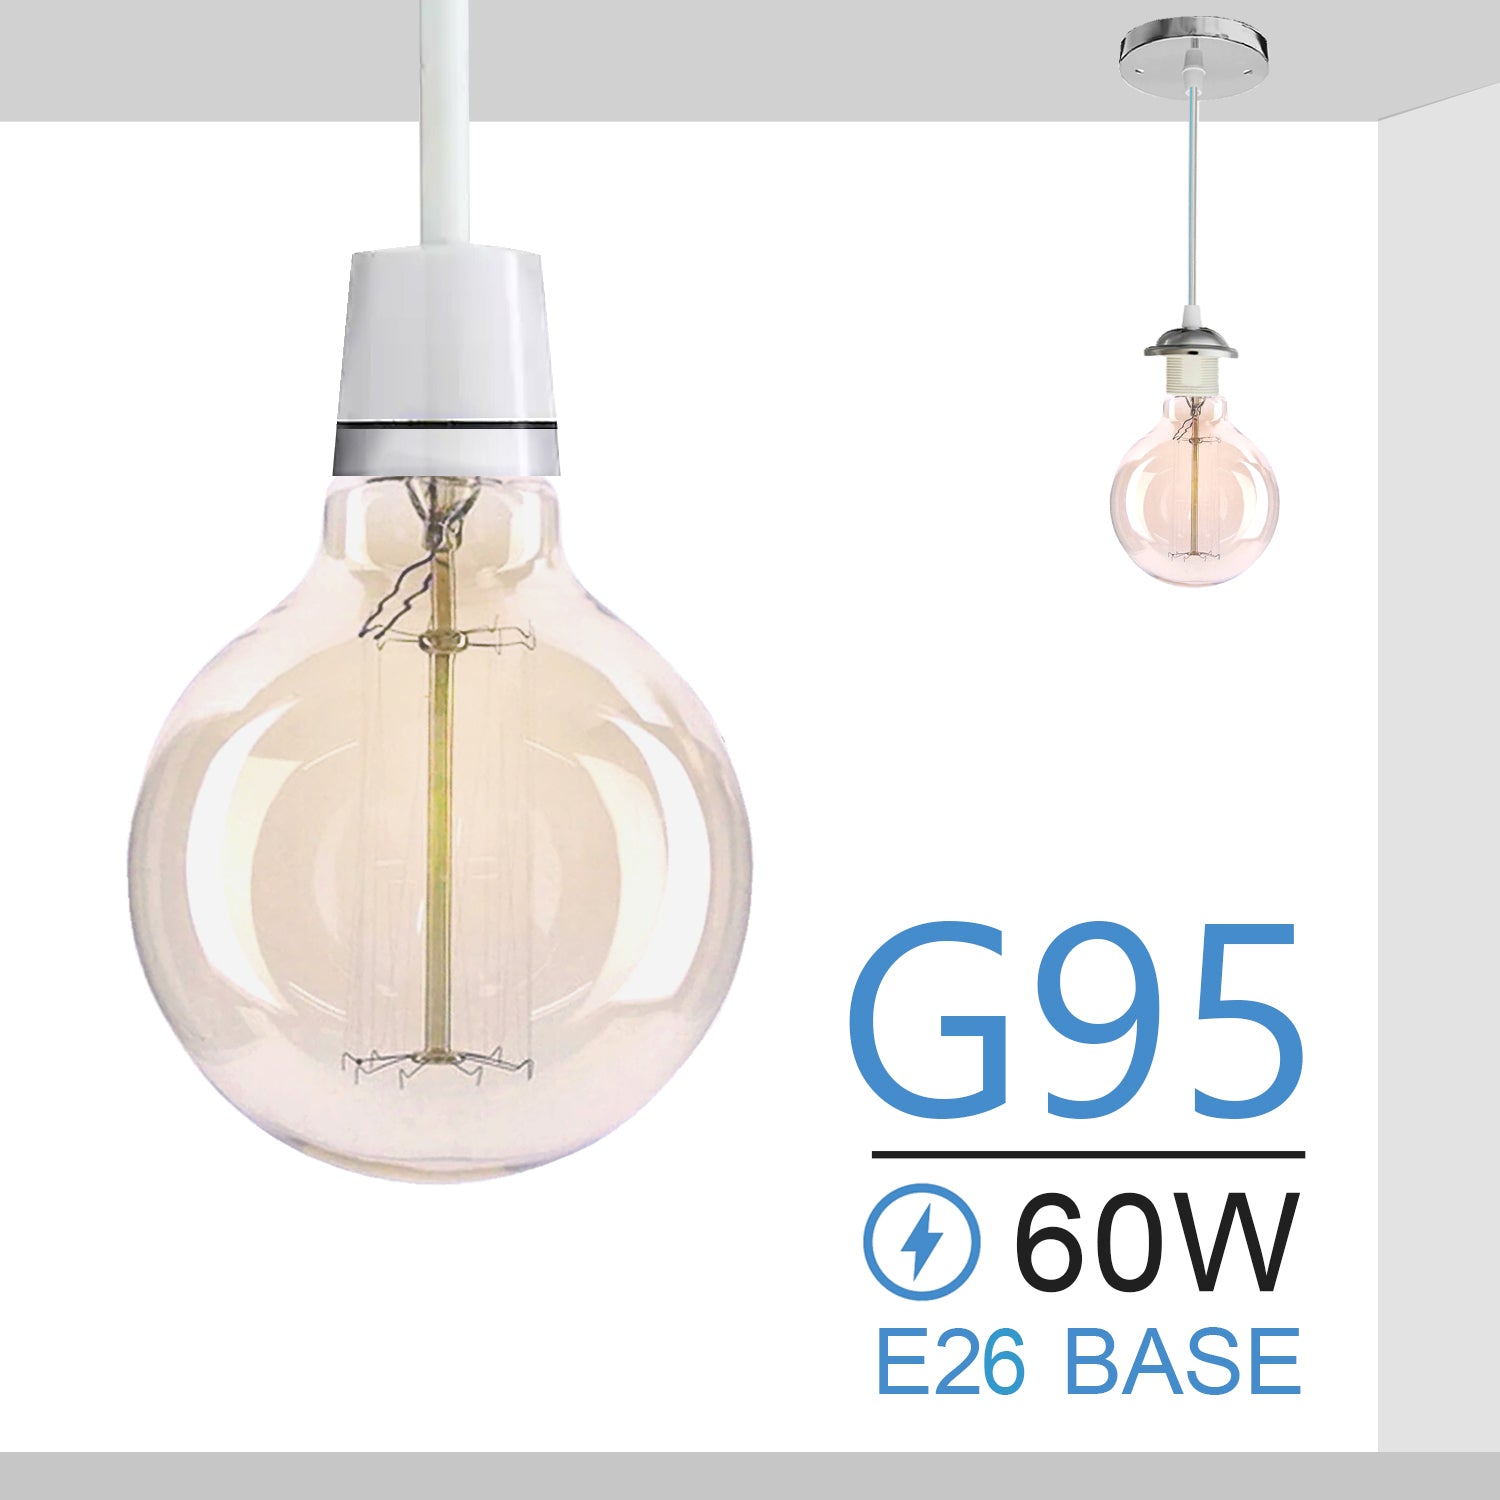 E26 G95 60W Vintage Retro Industrial Filament Dimmable Bulb~1049-4